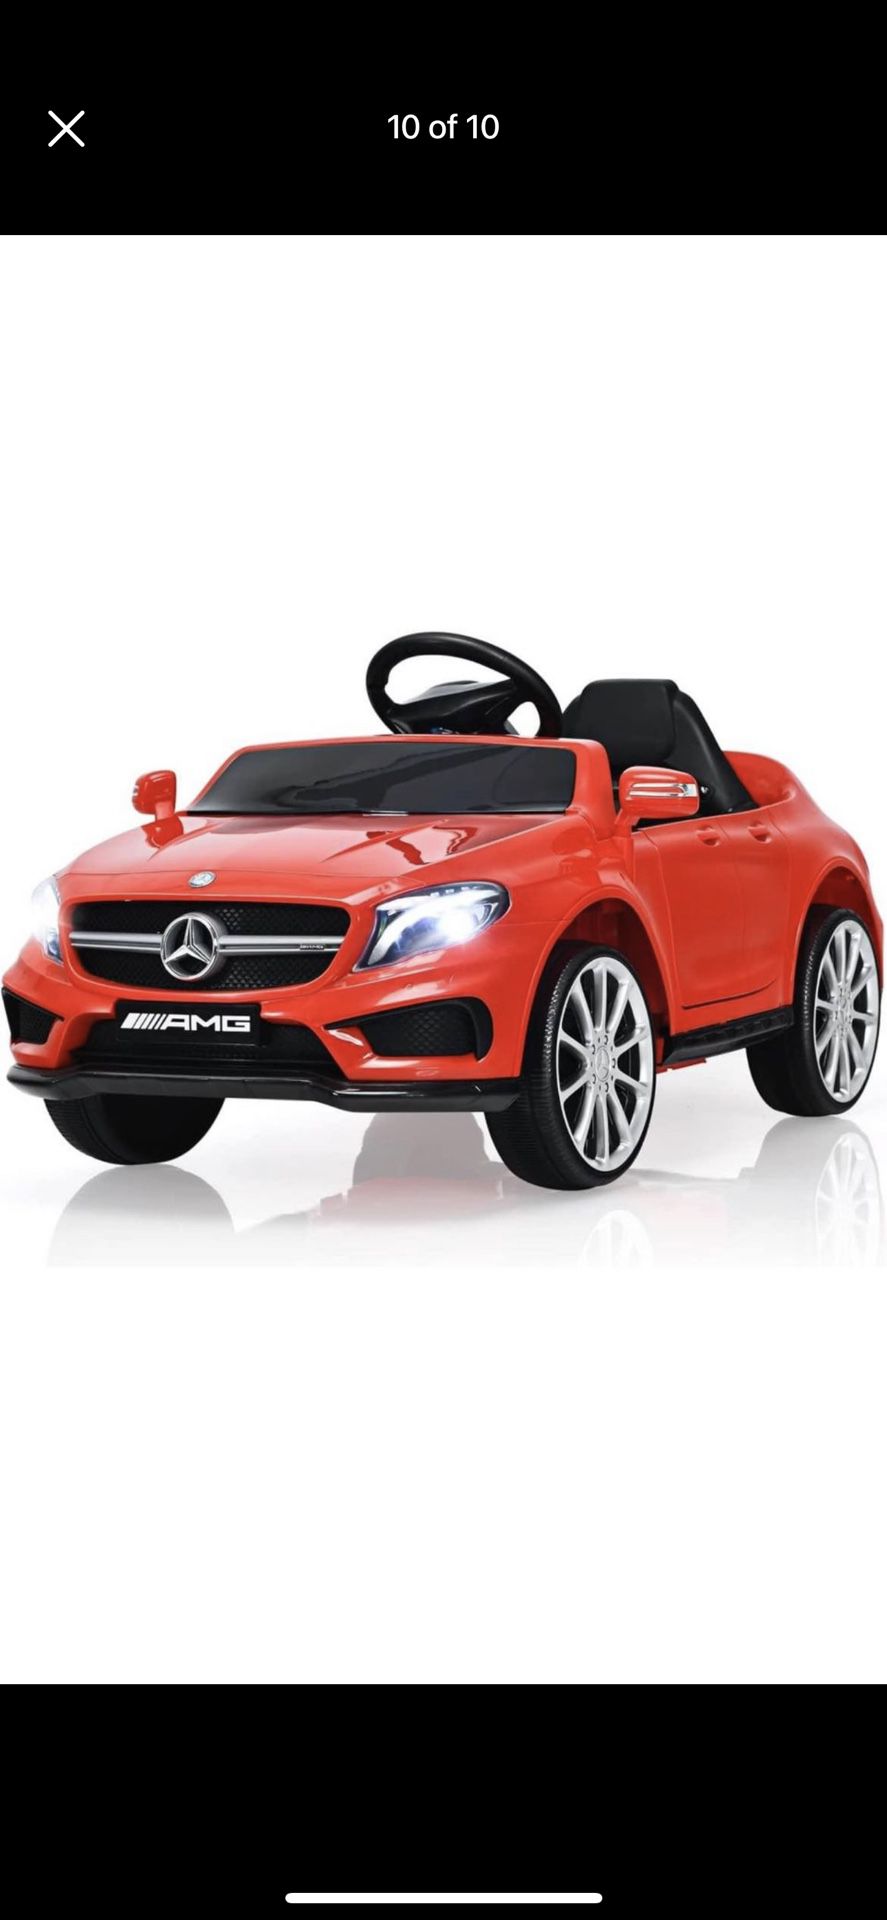 12V Electric Kids Ride On Car, Licensed Mercedes Benz GLA45 Toy Car with Remote Control, MP3 Plug, USB, 2 Speeds, LED Lights, Battery Powered Toy Vehi